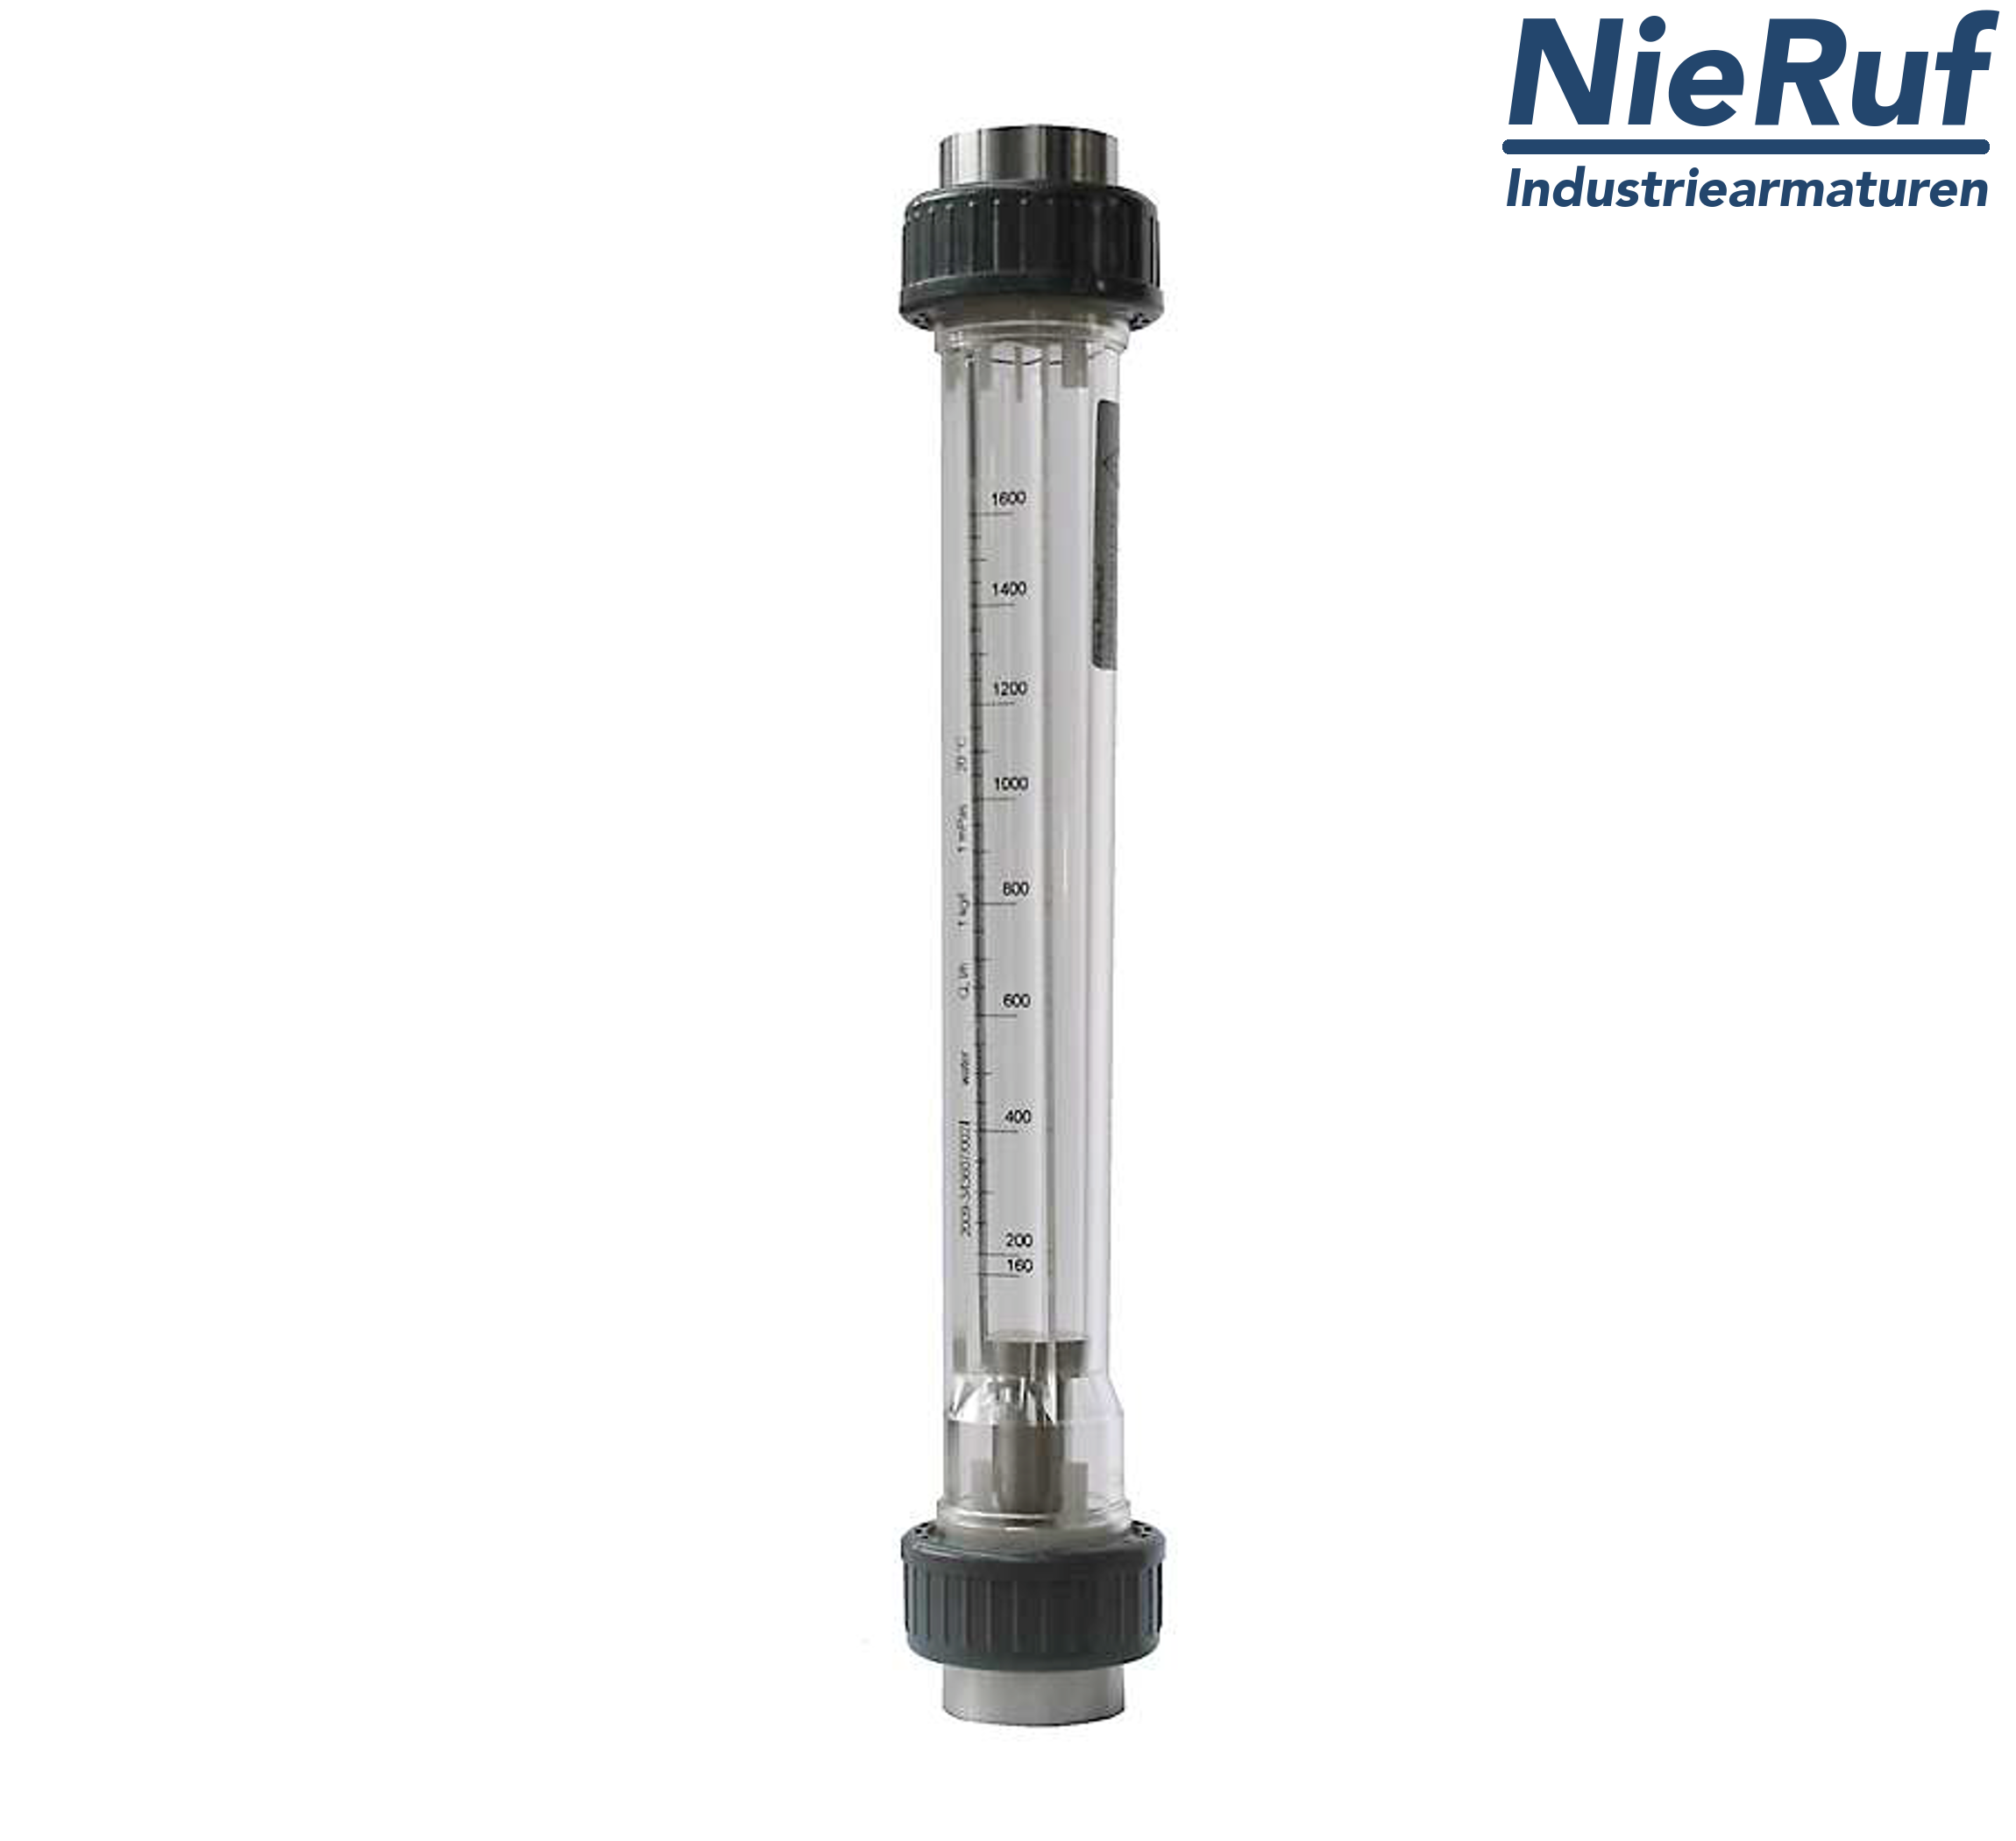 Variable area flowmeter 1" inch 160.0 - 1600 l/h water FKM